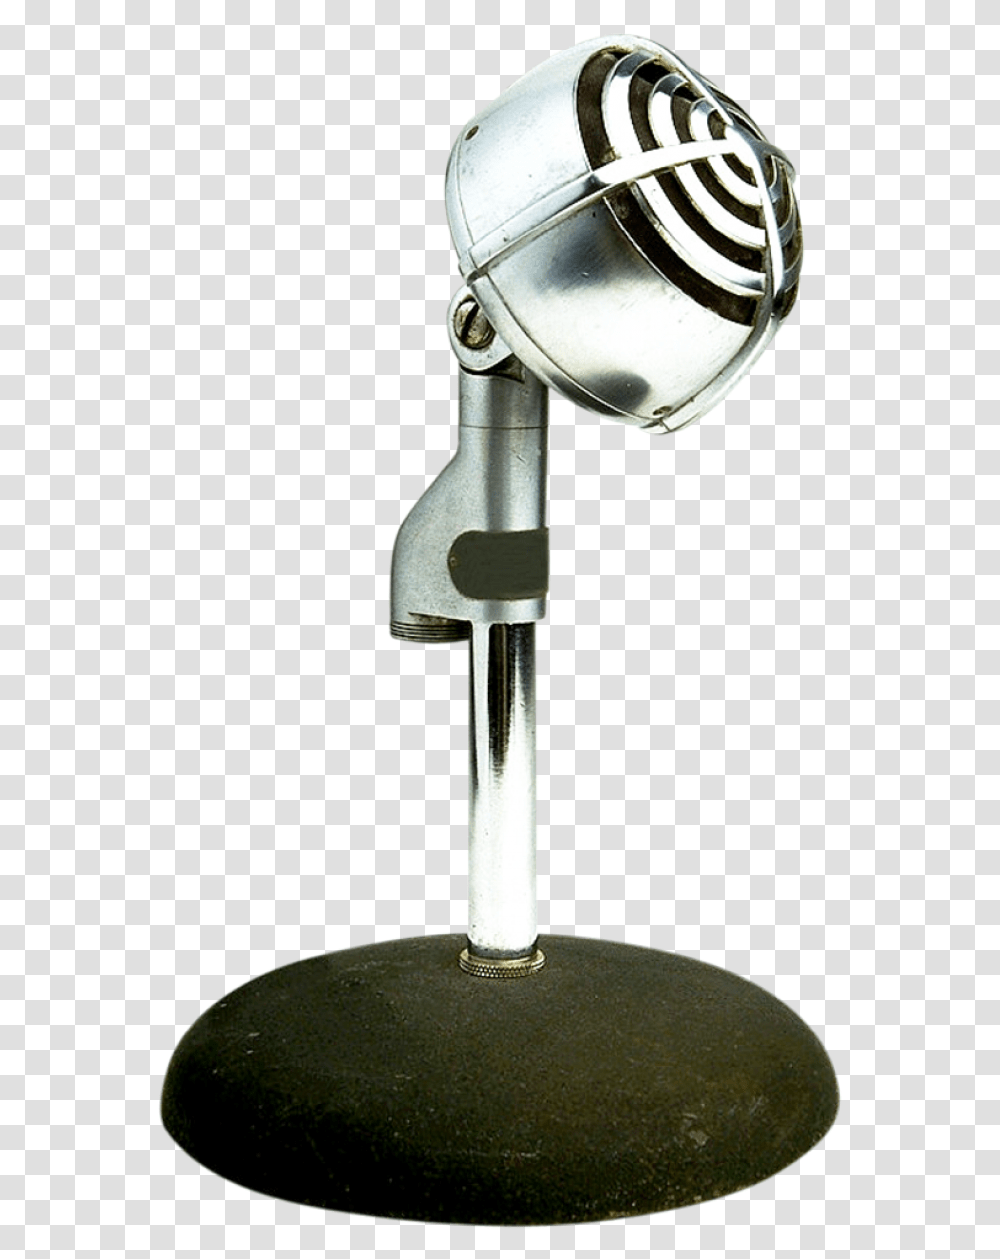 Vintage Microphone Image Purepng Free Portable Network Graphics, Lighting, Microscope, Electrical Device, Spotlight Transparent Png